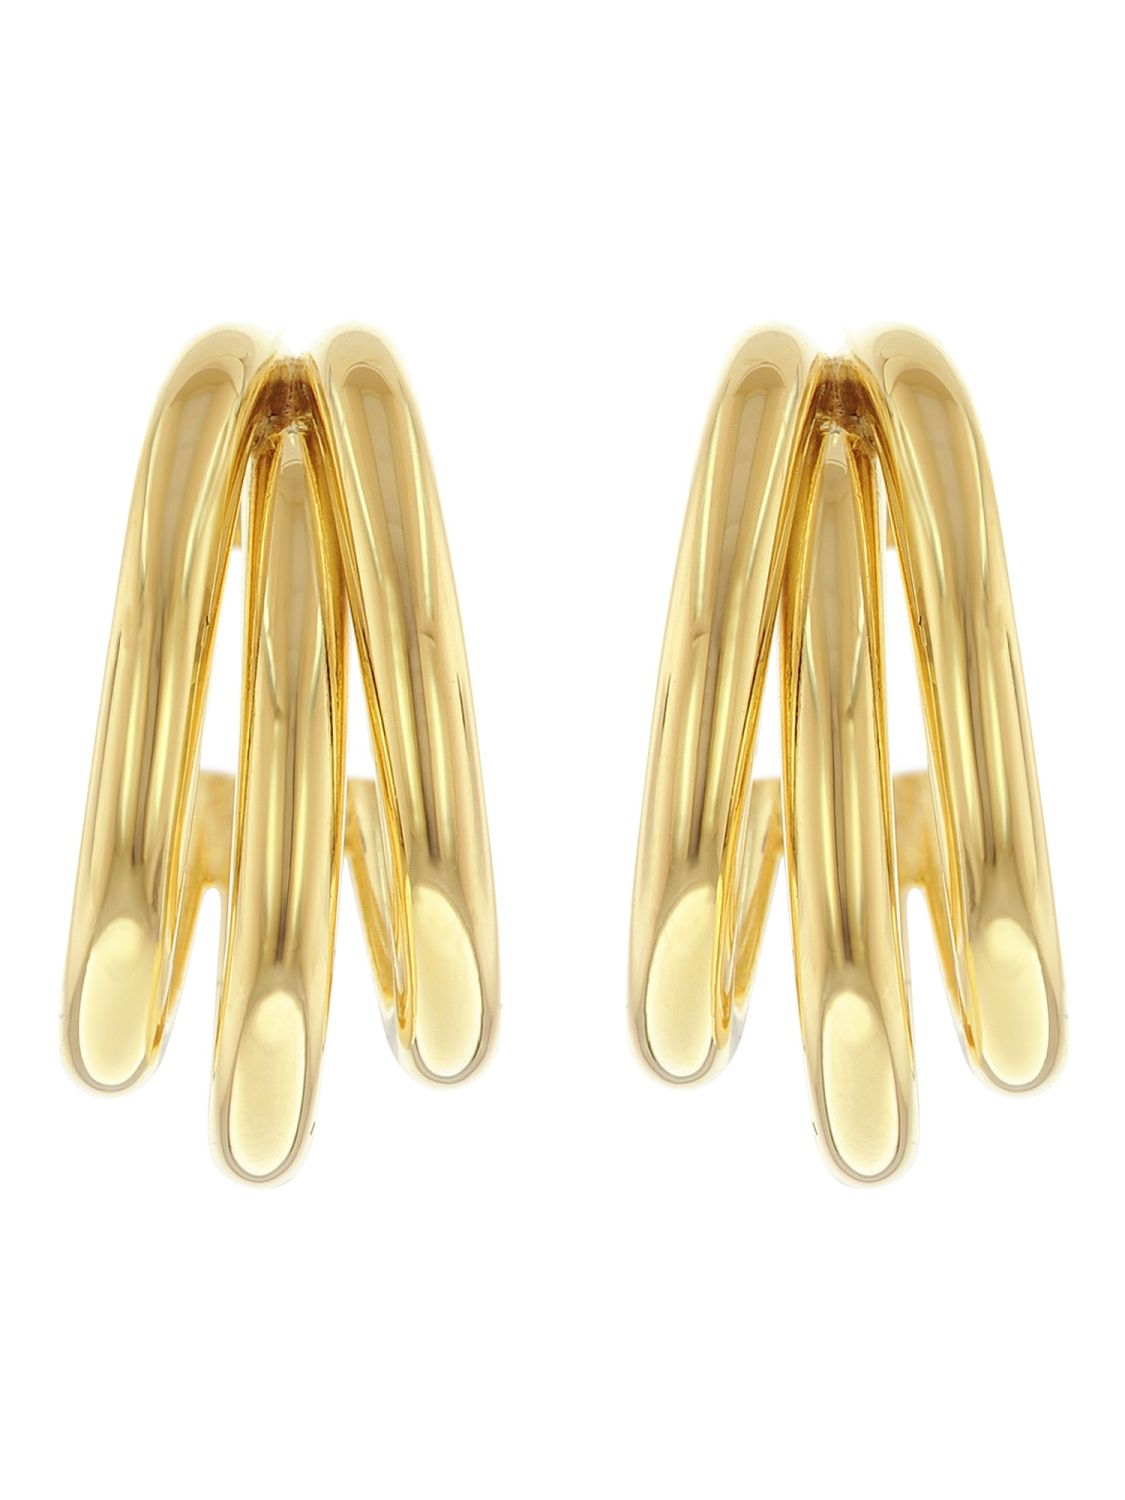 9ct Gold 4x20mm Satin Half Round Hoop Earrings | Angus & Coote